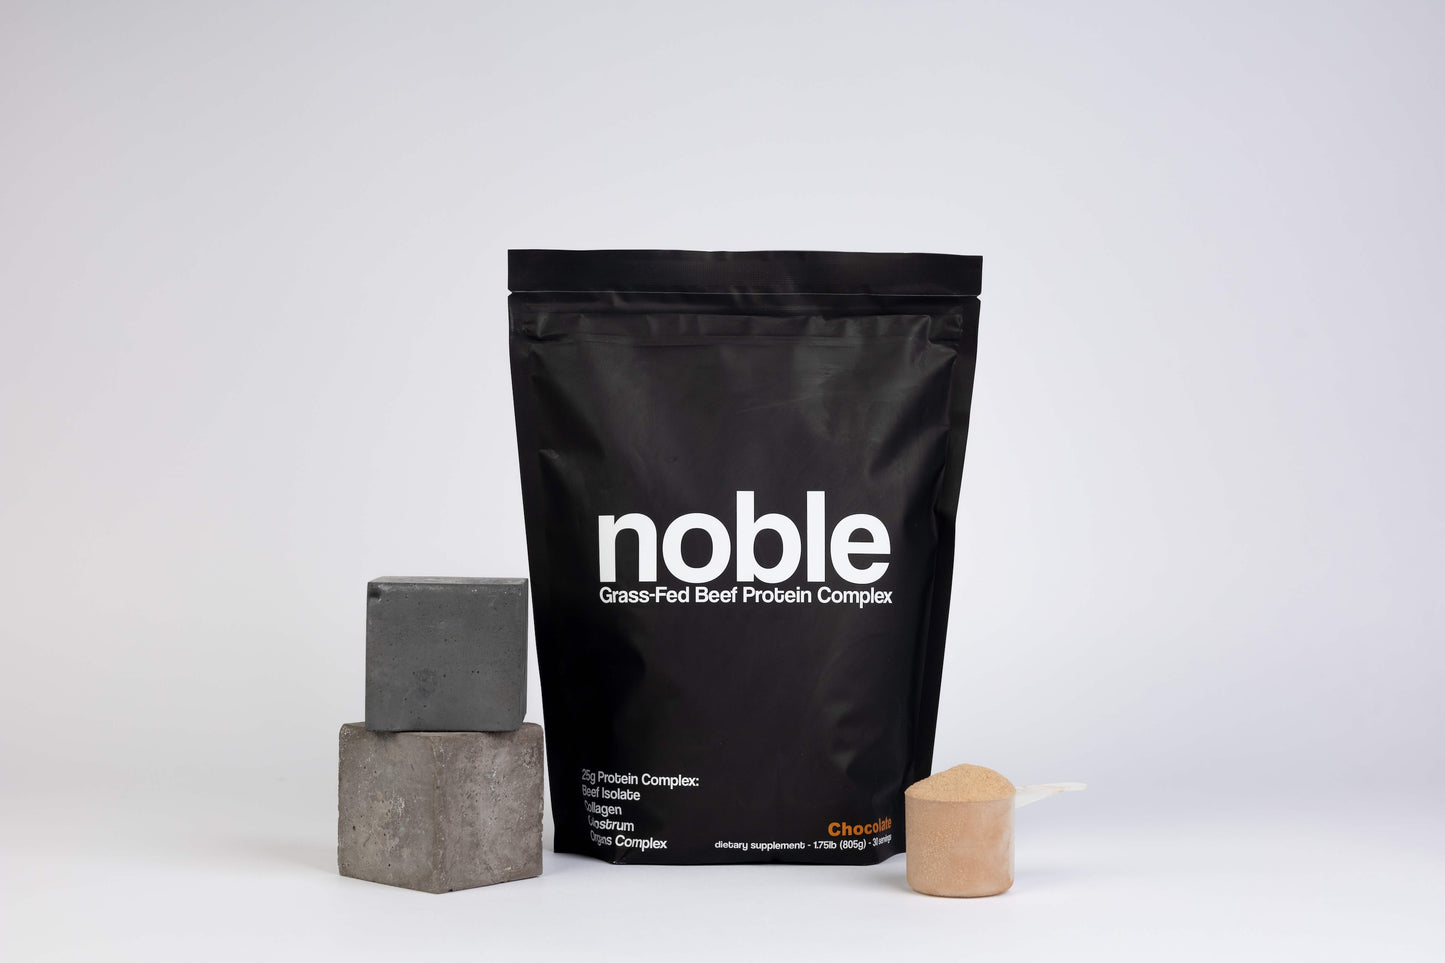 Nose-To-Tail Protein With Organs, Collagen, & Colostrum